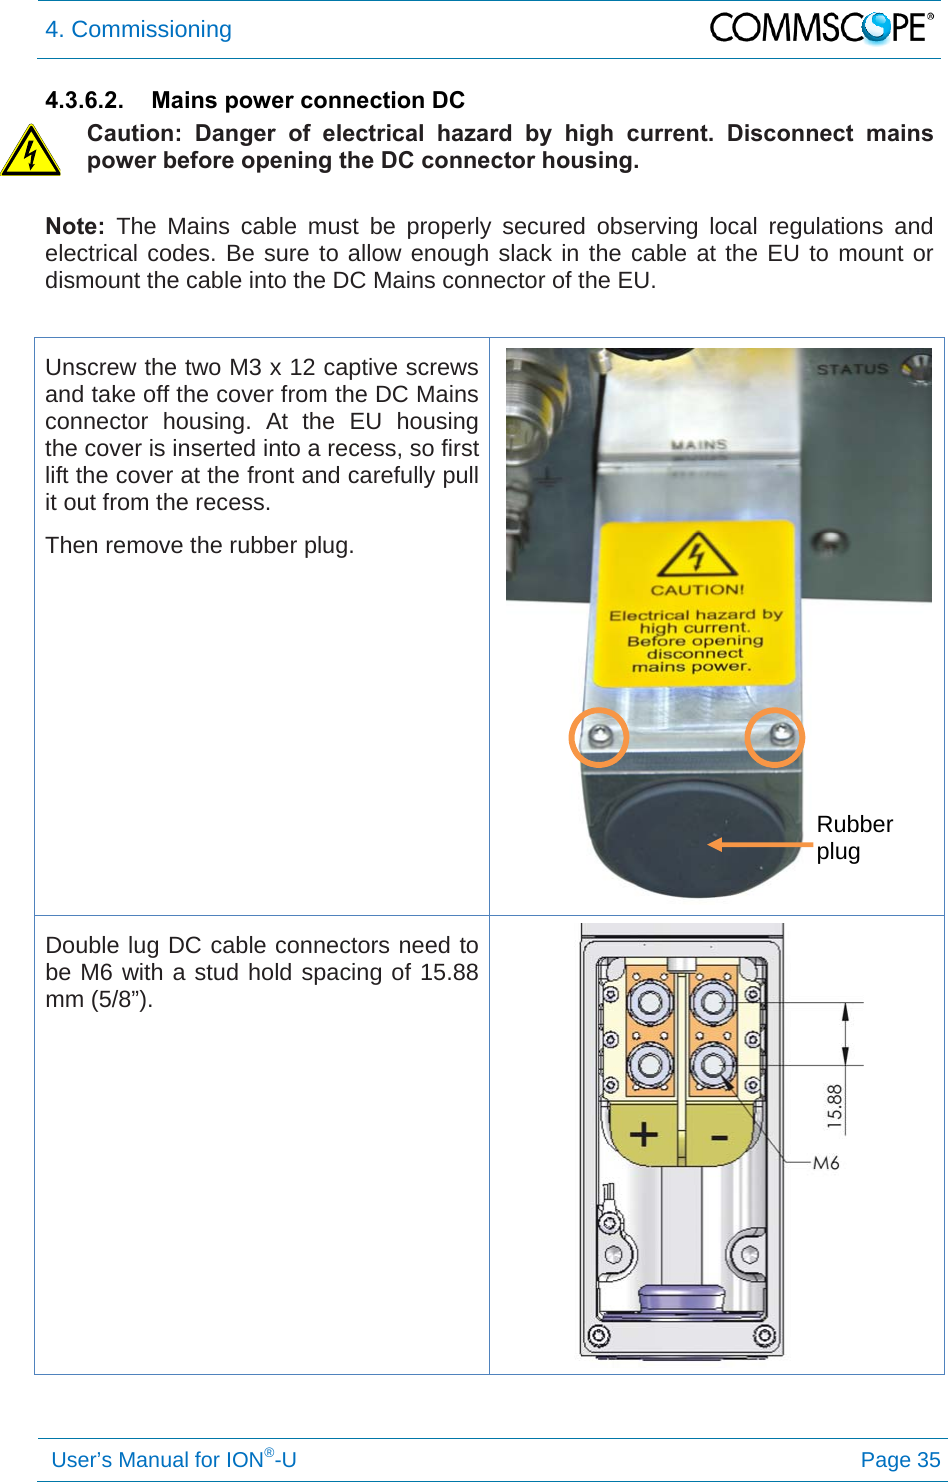 4. Commissioning   User’s Manual for ION®-U Page 35 4.3.6.2.  Mains power connection DC Caution: Danger of electrical hazard by high current. Disconnect mains power before opening the DC connector housing. Note: The Mains cable must be properly secured observing local regulations and electrical codes. Be sure to allow enough slack in the cable at the EU to mount or dismount the cable into the DC Mains connector of the EU.  Unscrew the two M3 x 12 captive screws and take off the cover from the DC Mains connector housing. At the EU housing the cover is inserted into a recess, so first lift the cover at the front and carefully pull it out from the recess. Then remove the rubber plug.  Double lug DC cable connectors need to be M6 with a stud hold spacing of 15.88 mm (5/8”).    Rubber plug 